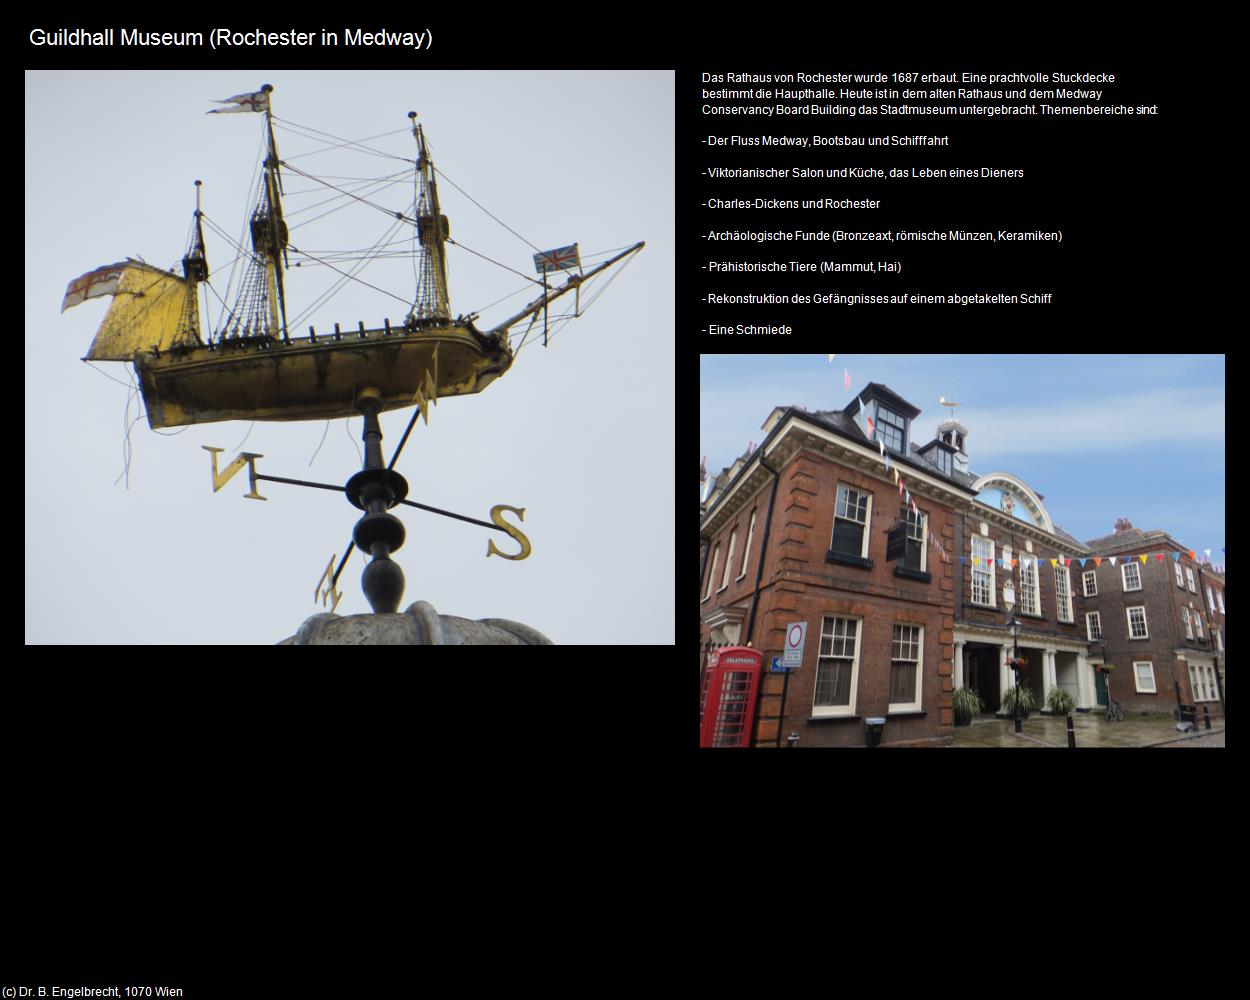 Guildhall Museum (Rochester in Medway, England) in Kulturatlas-ENGLAND und WALES